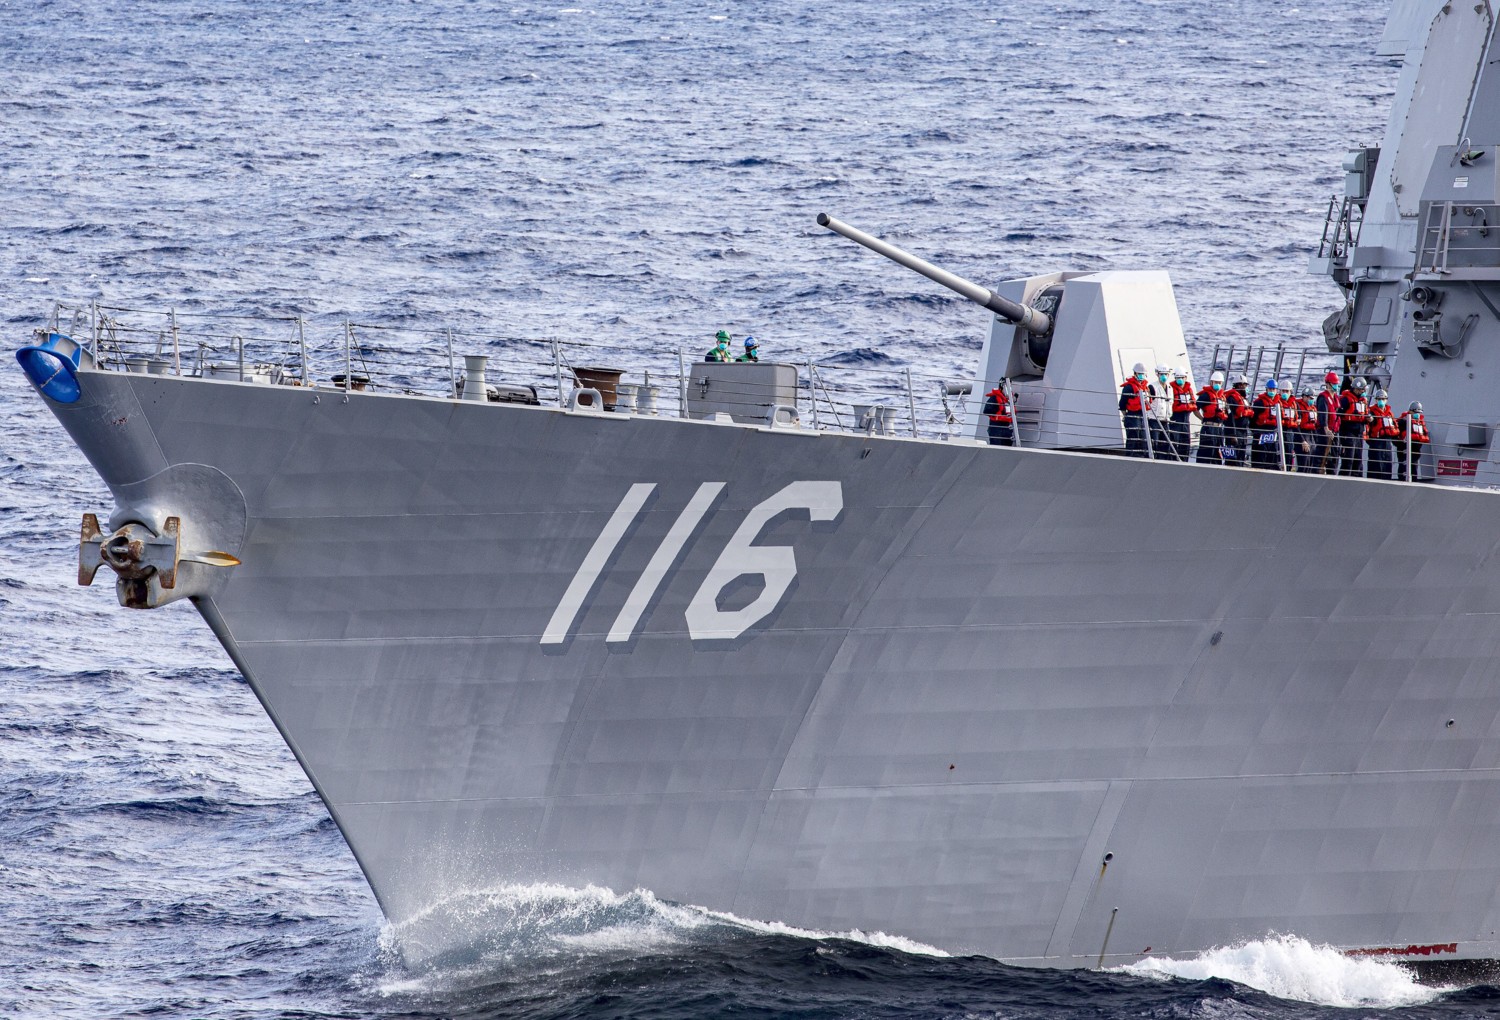 ddg-116 uss thomas hudner arleigh burke class guided missile destroyer us navy aegis 36 replenishment at sea